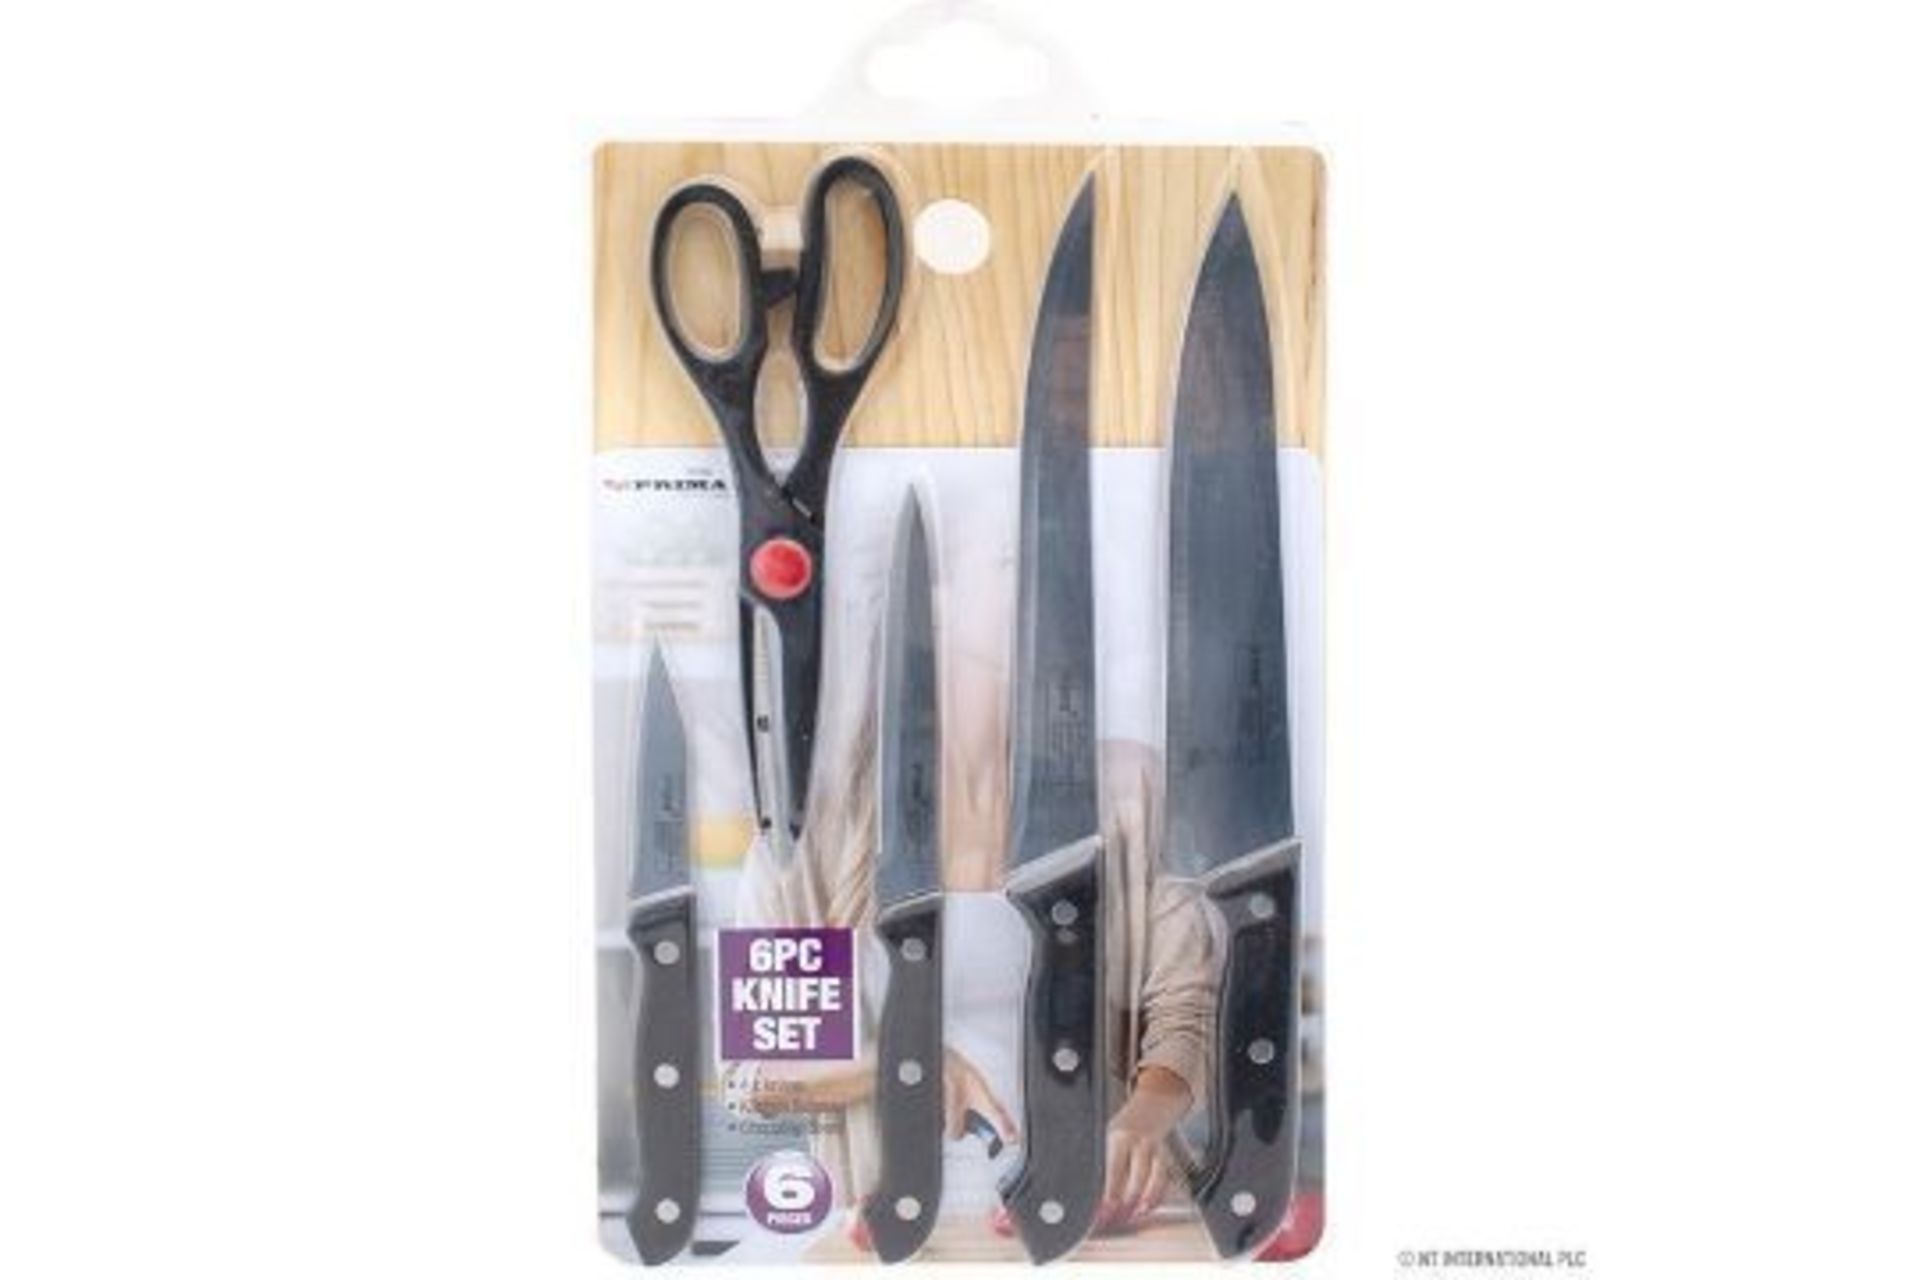 New 6pcs Knife Set with Wooden Cutting Board